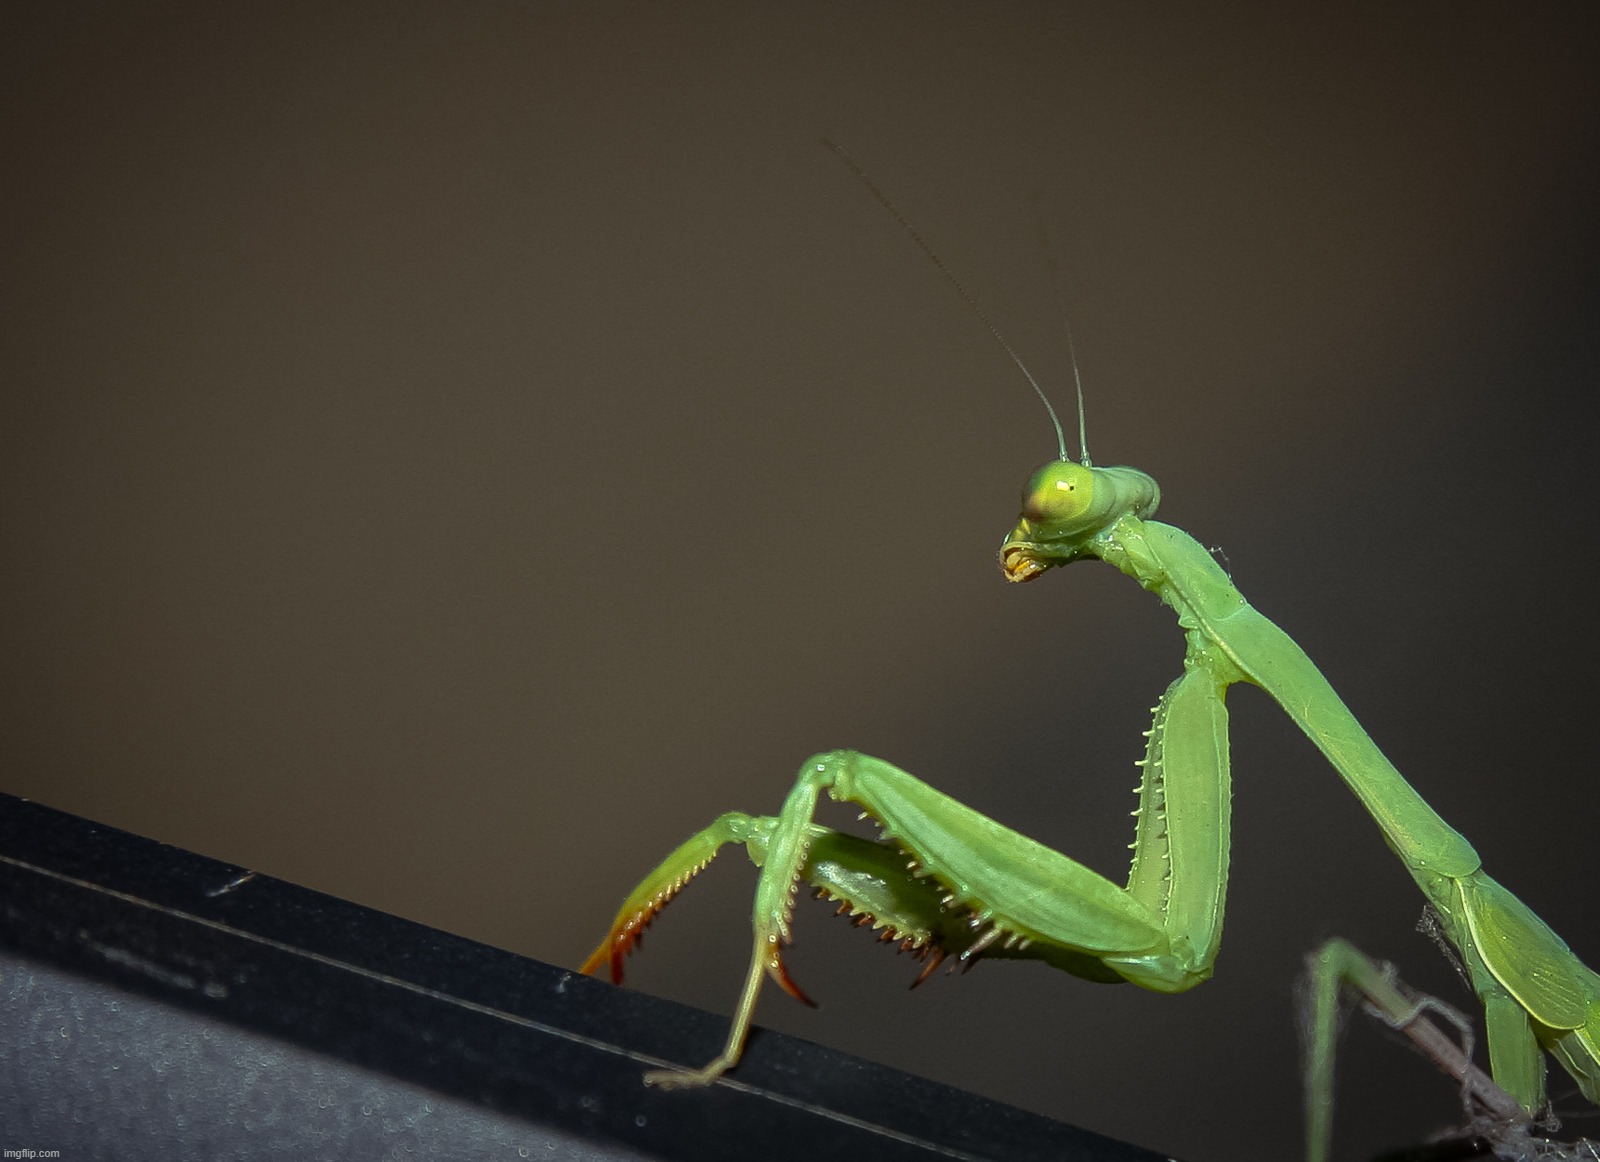 Another view of the mantis climbing the broomstick | image tagged in original photography,egos,praying mantis,green,broom | made w/ Imgflip meme maker